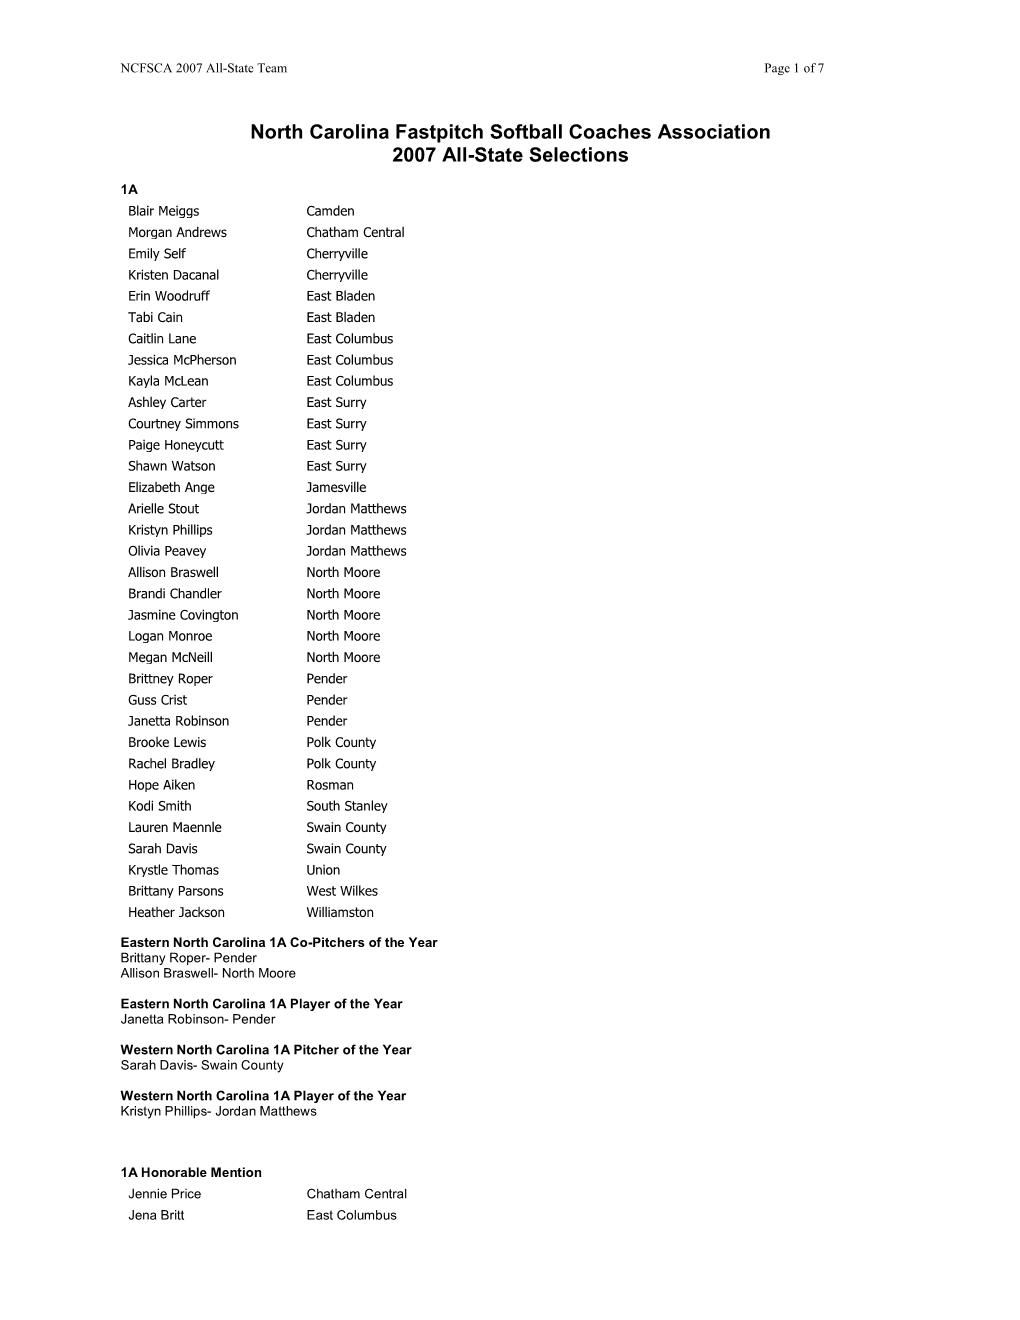 North Carolina Fastpitch Softball Coaches Association 2007 All-State Selections